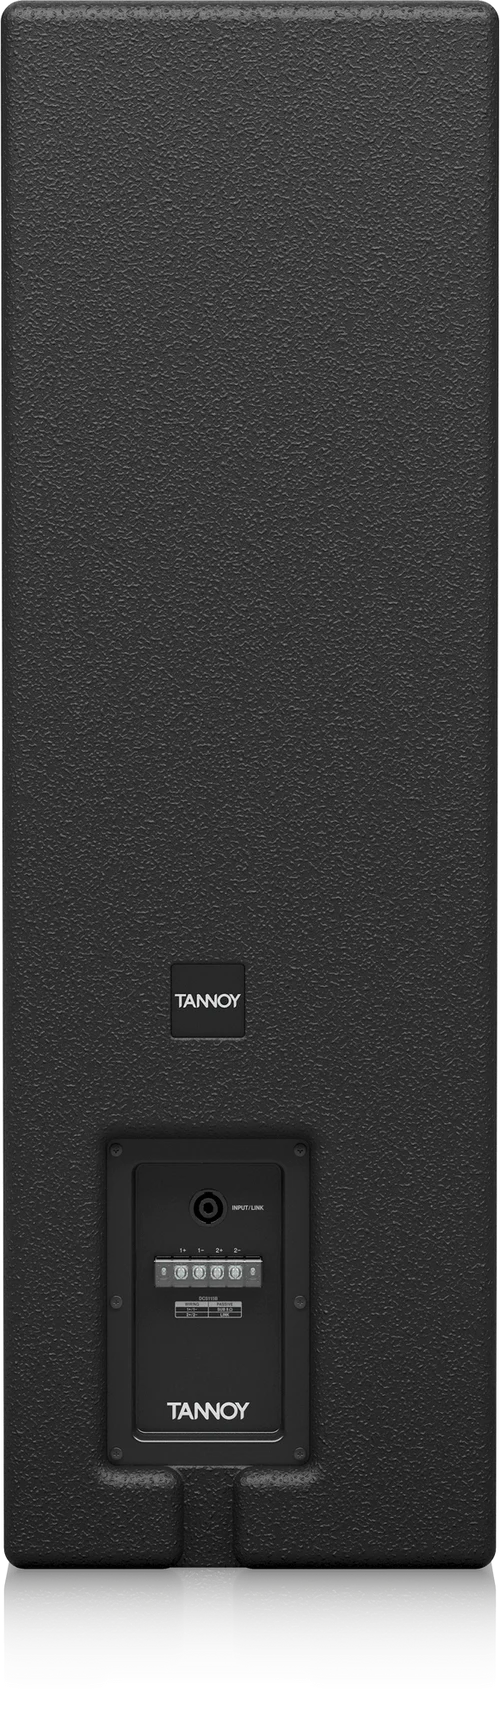 Tannoy DCS115B Low Profile Subwoofer For Cinema Installation Applications - 15"